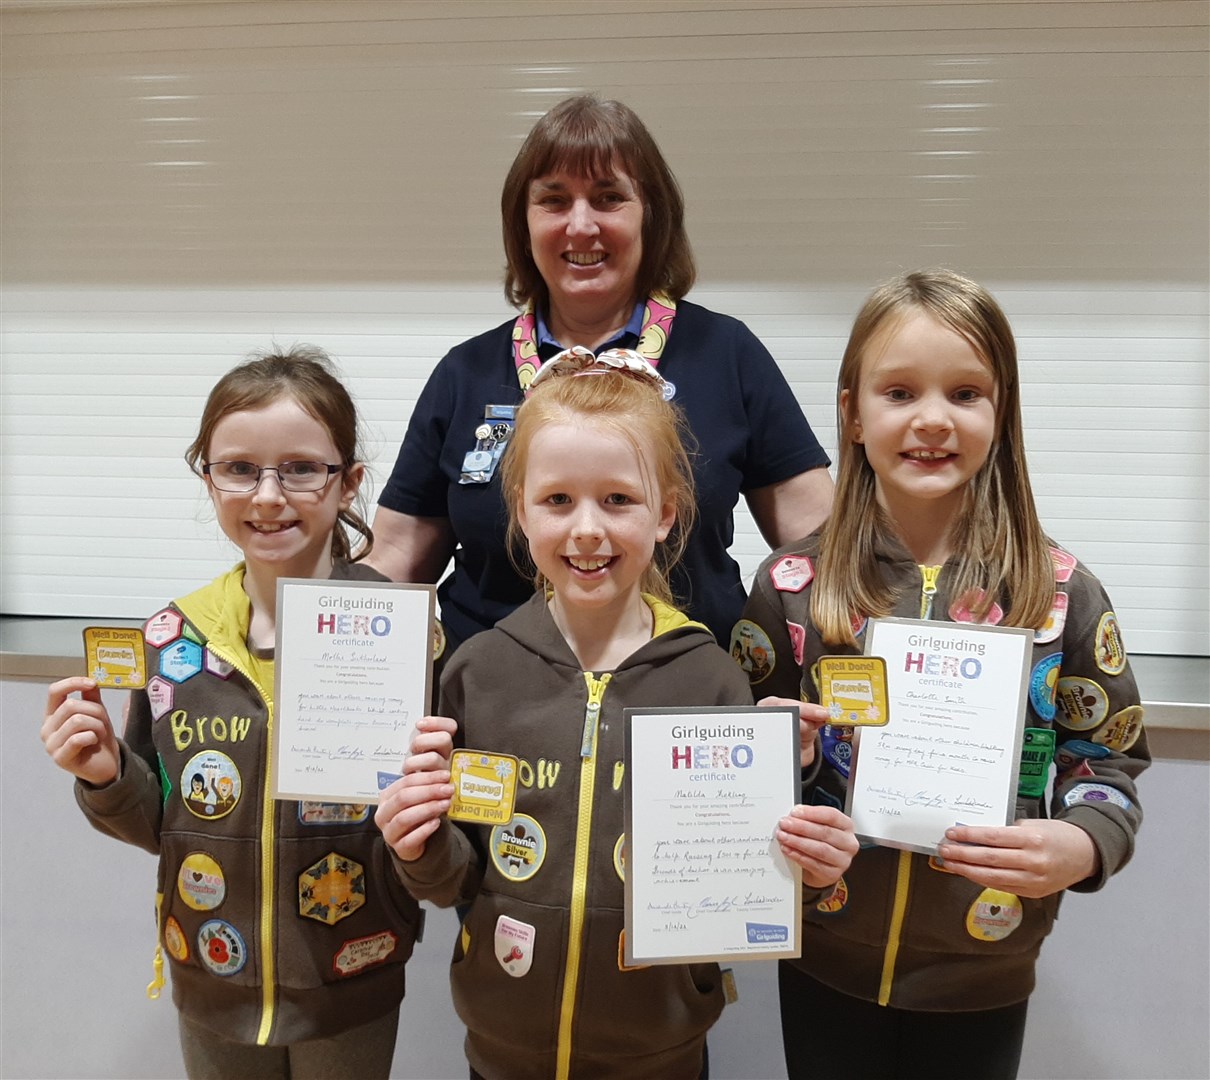 Girlguiding Moray country commissioner Louise Winder with Matilda, Charlotte and Mollie.